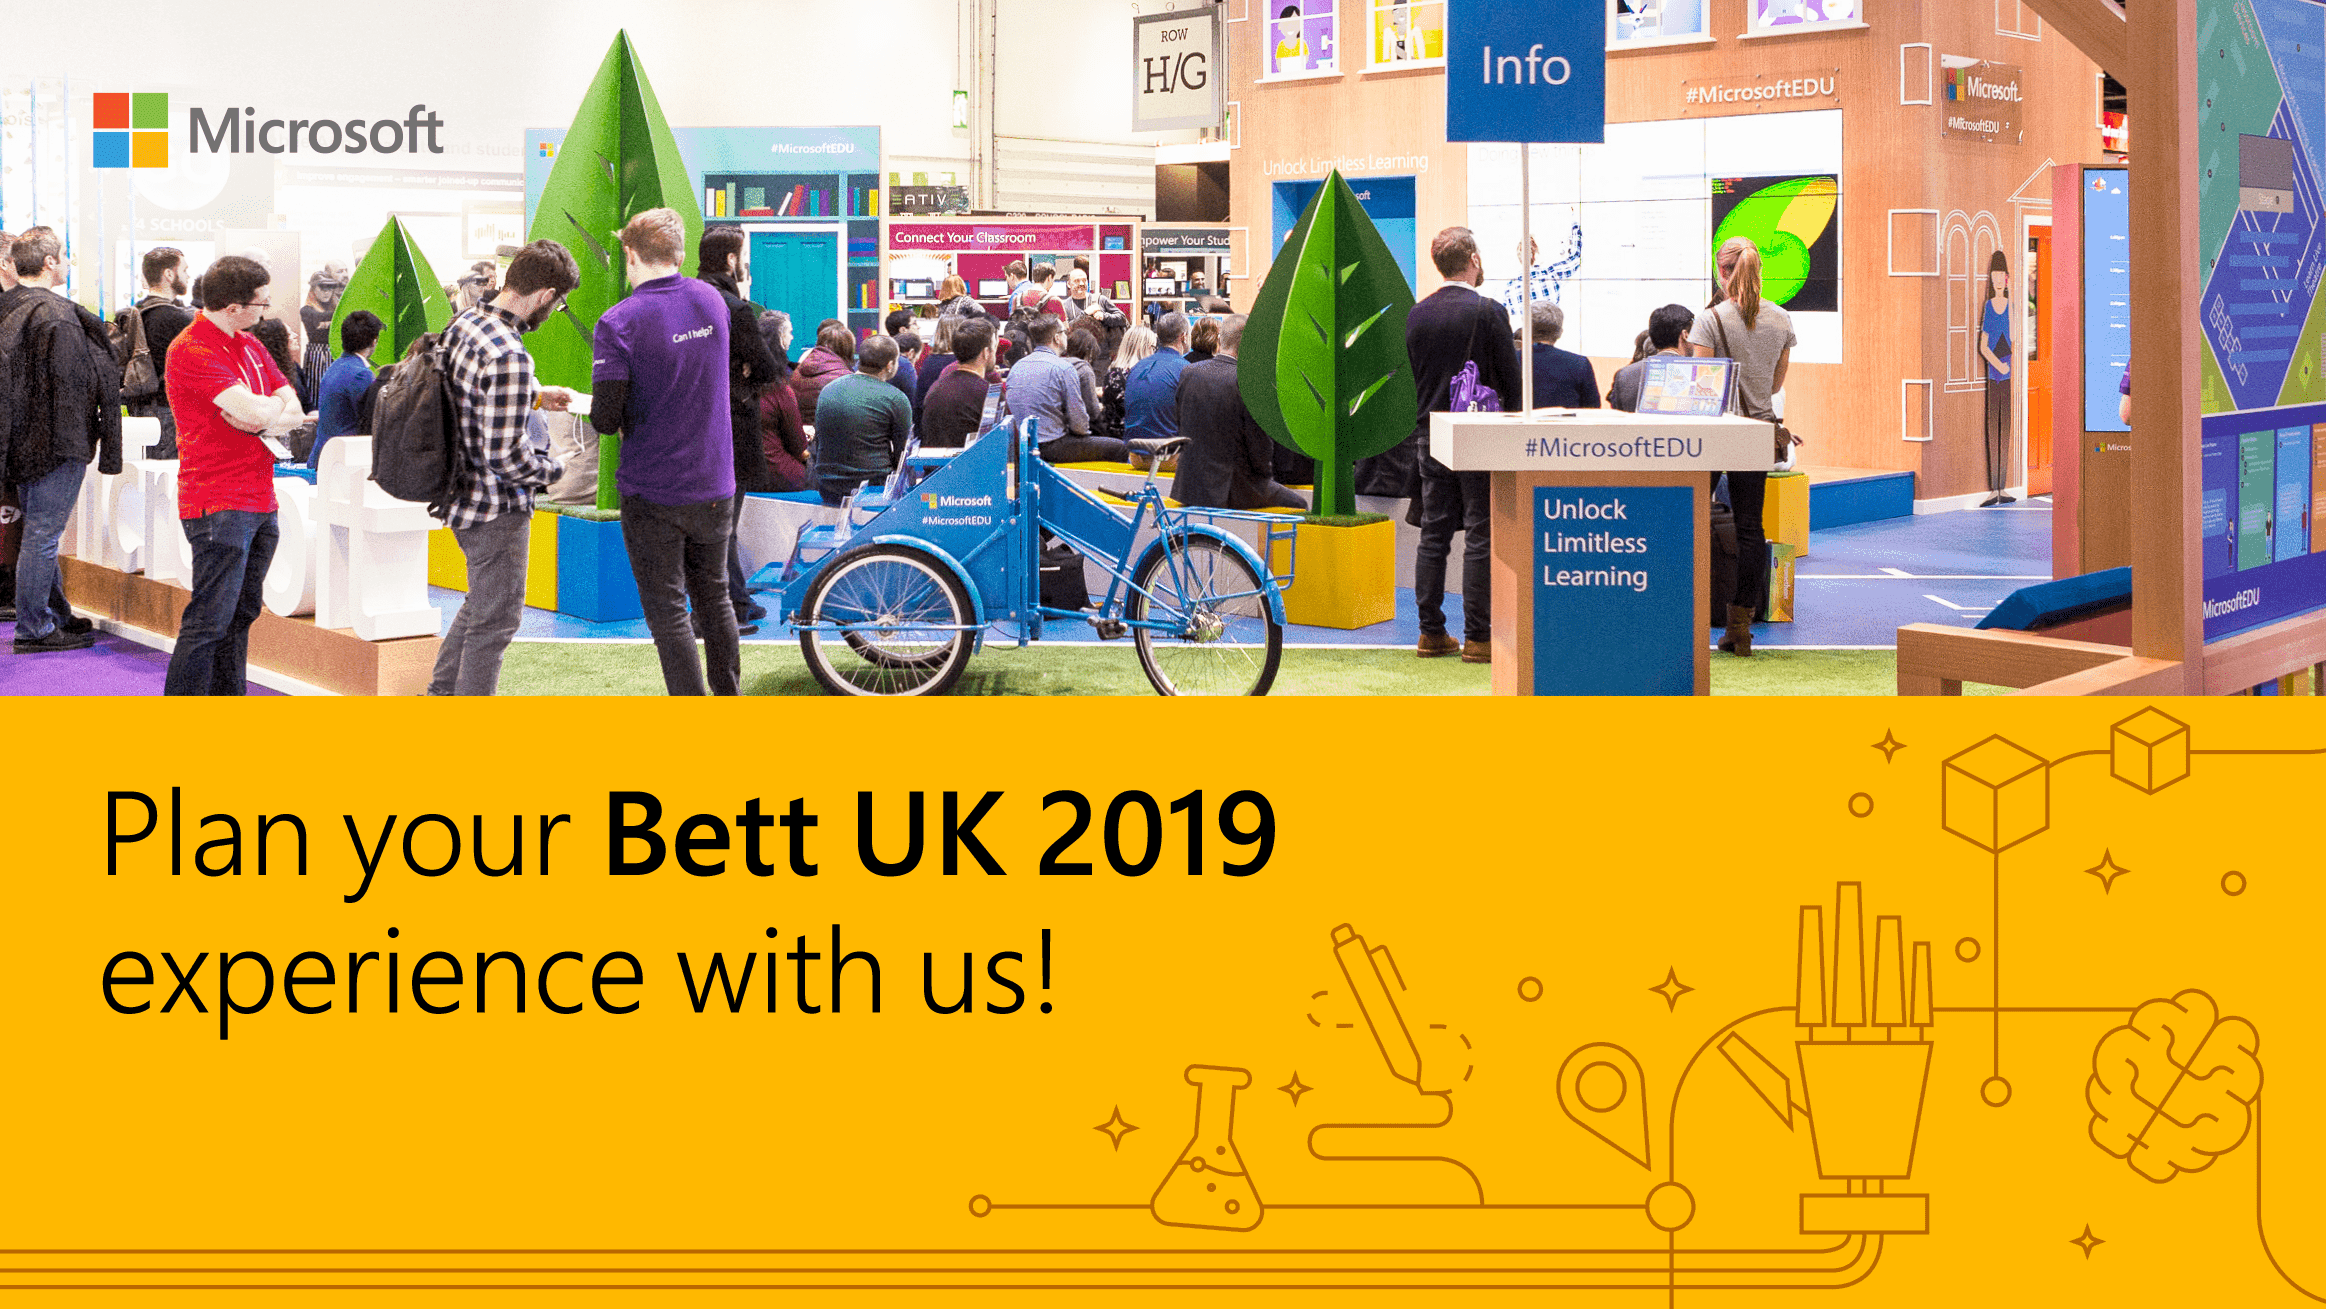 Microsoft plans big presence at Bett education conference in UK next week - OnMSFT.com - January 14, 2019